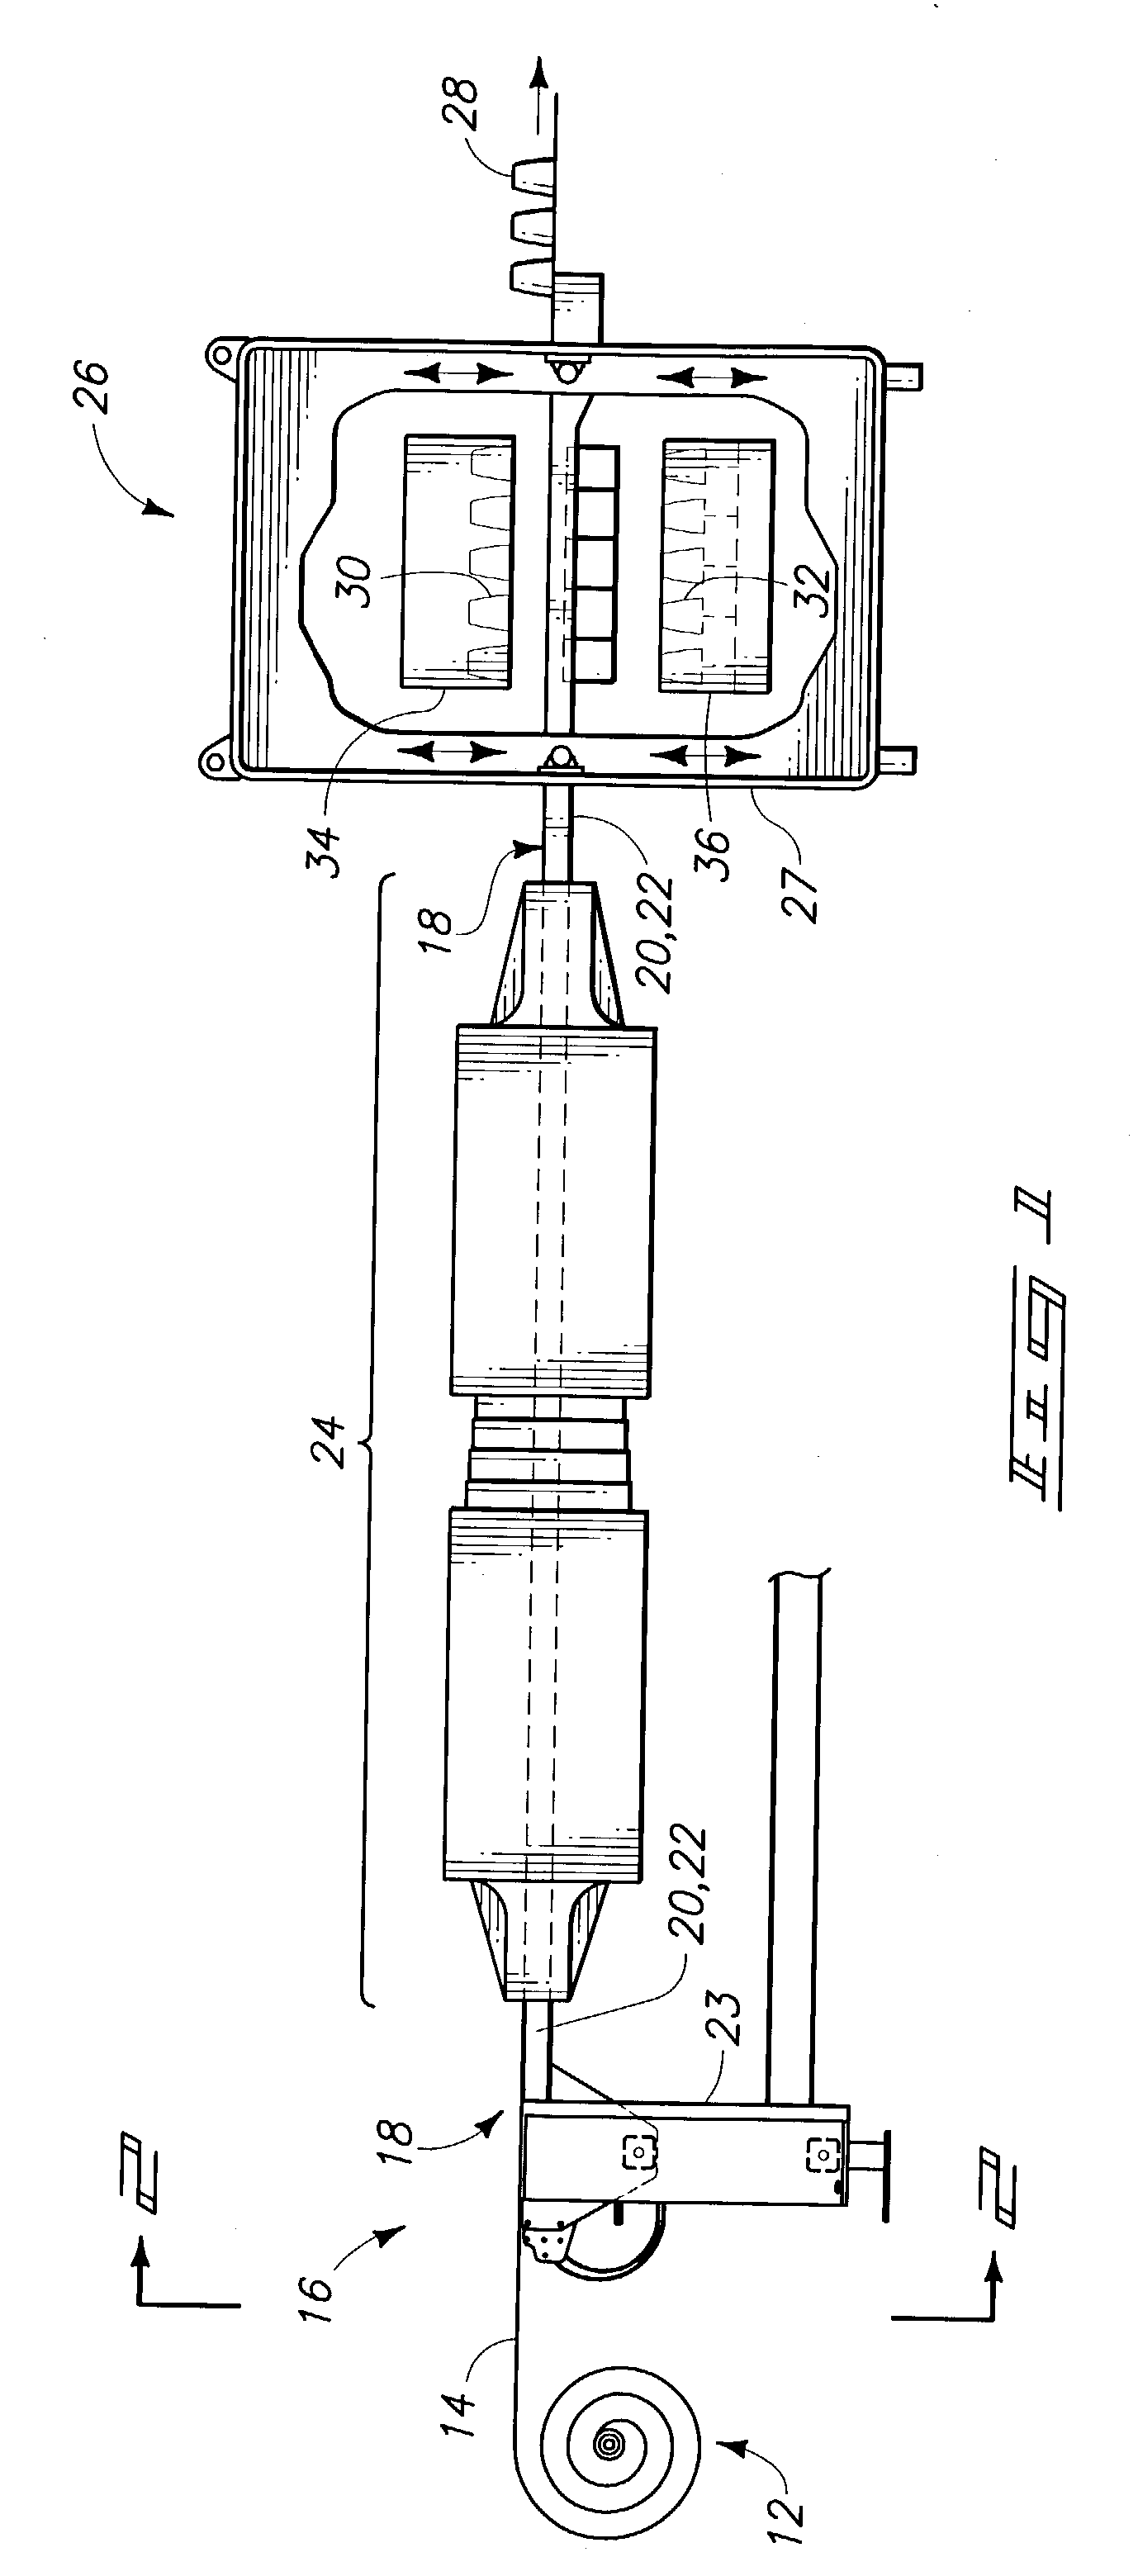 Thermoformable web support apparatus and support device for a heated plastic sheet